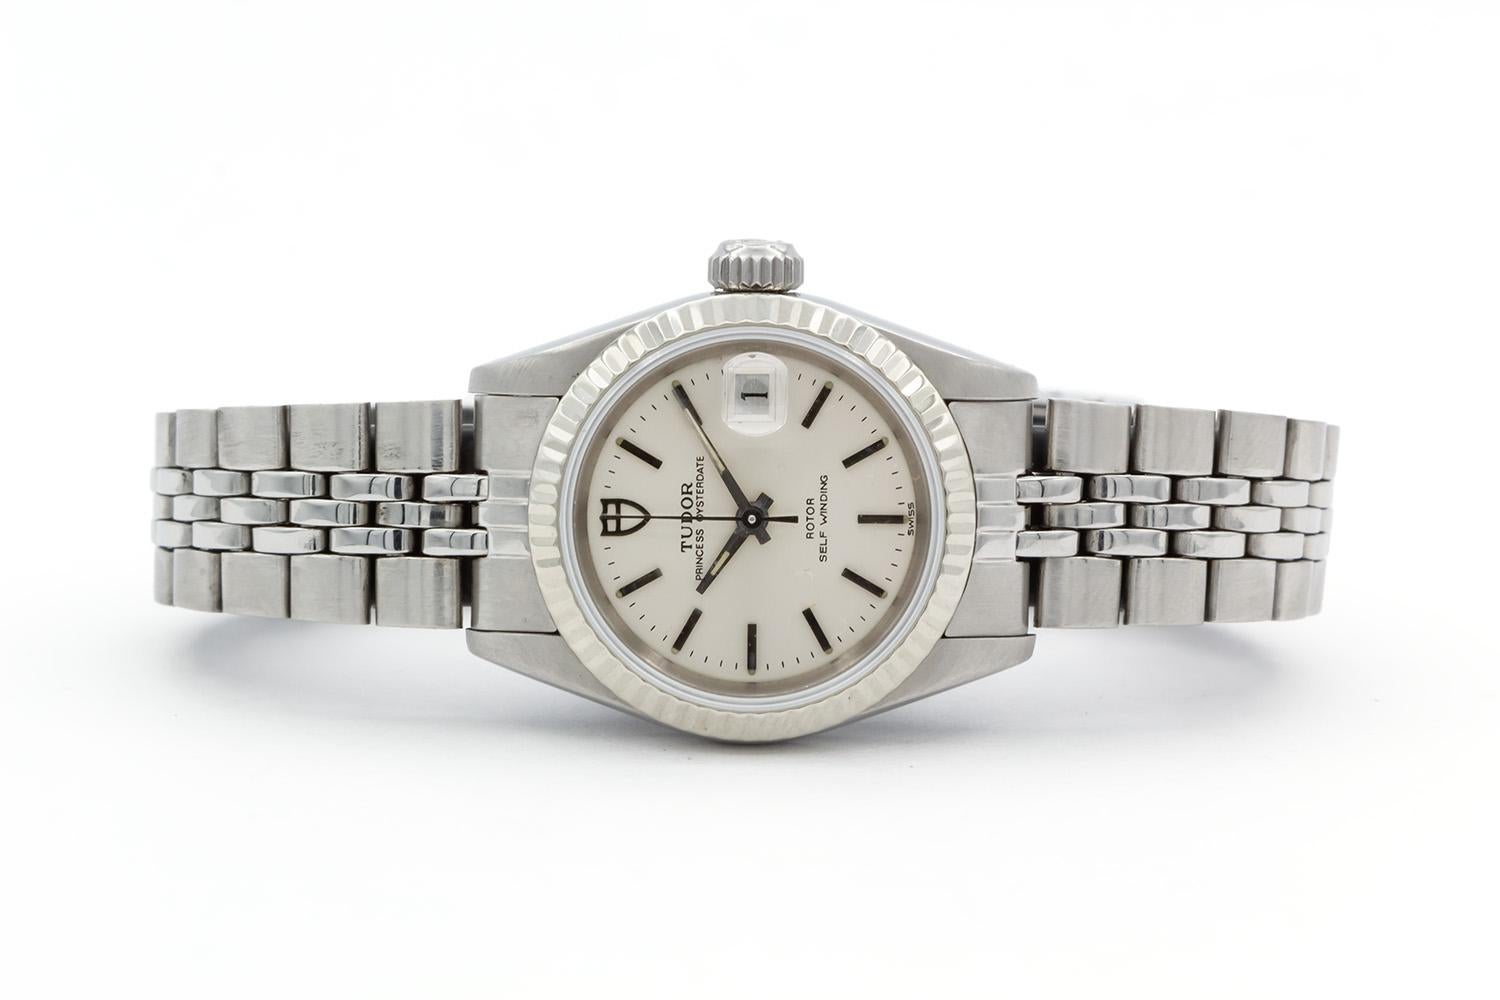 We are pleased to offer this Tudor Princess Oyster Date 92414N. It is all original and features a 25mm stainless steel case 18k white gold fluted bezel, silver stick dial with date aperture, stainless steel jubilee bracelet. It will fit up to a 6.5